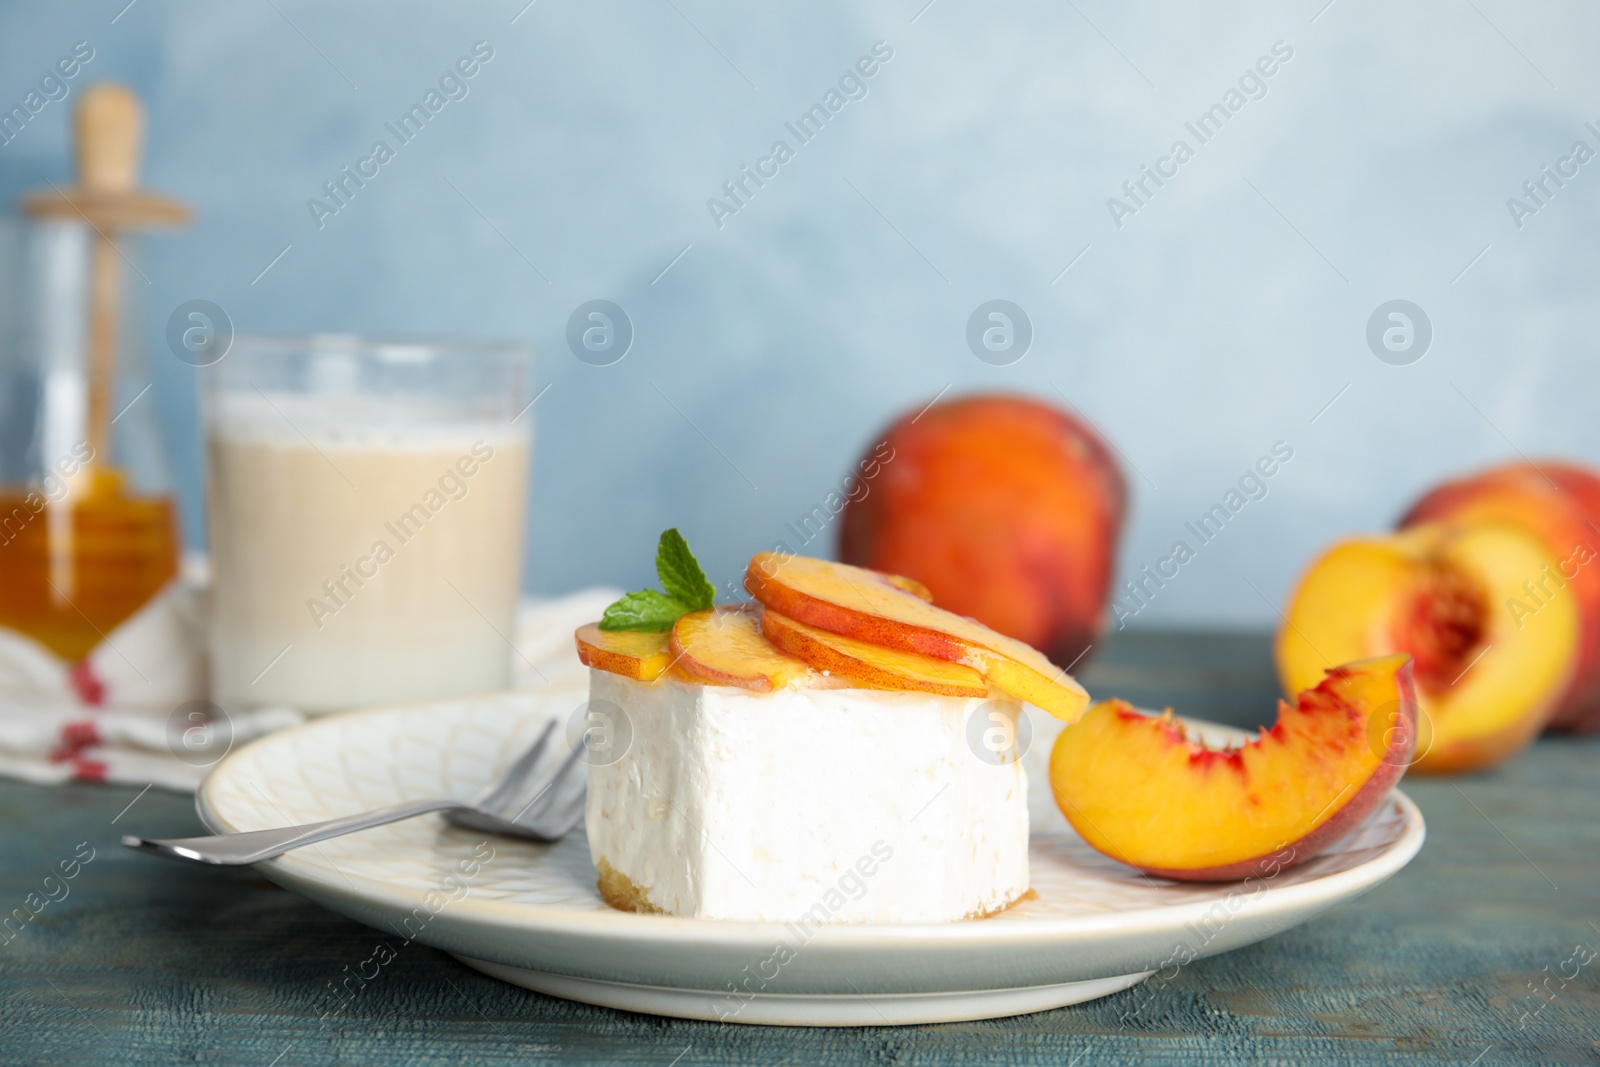 Photo of Delicious peach dessert on blue wooden table